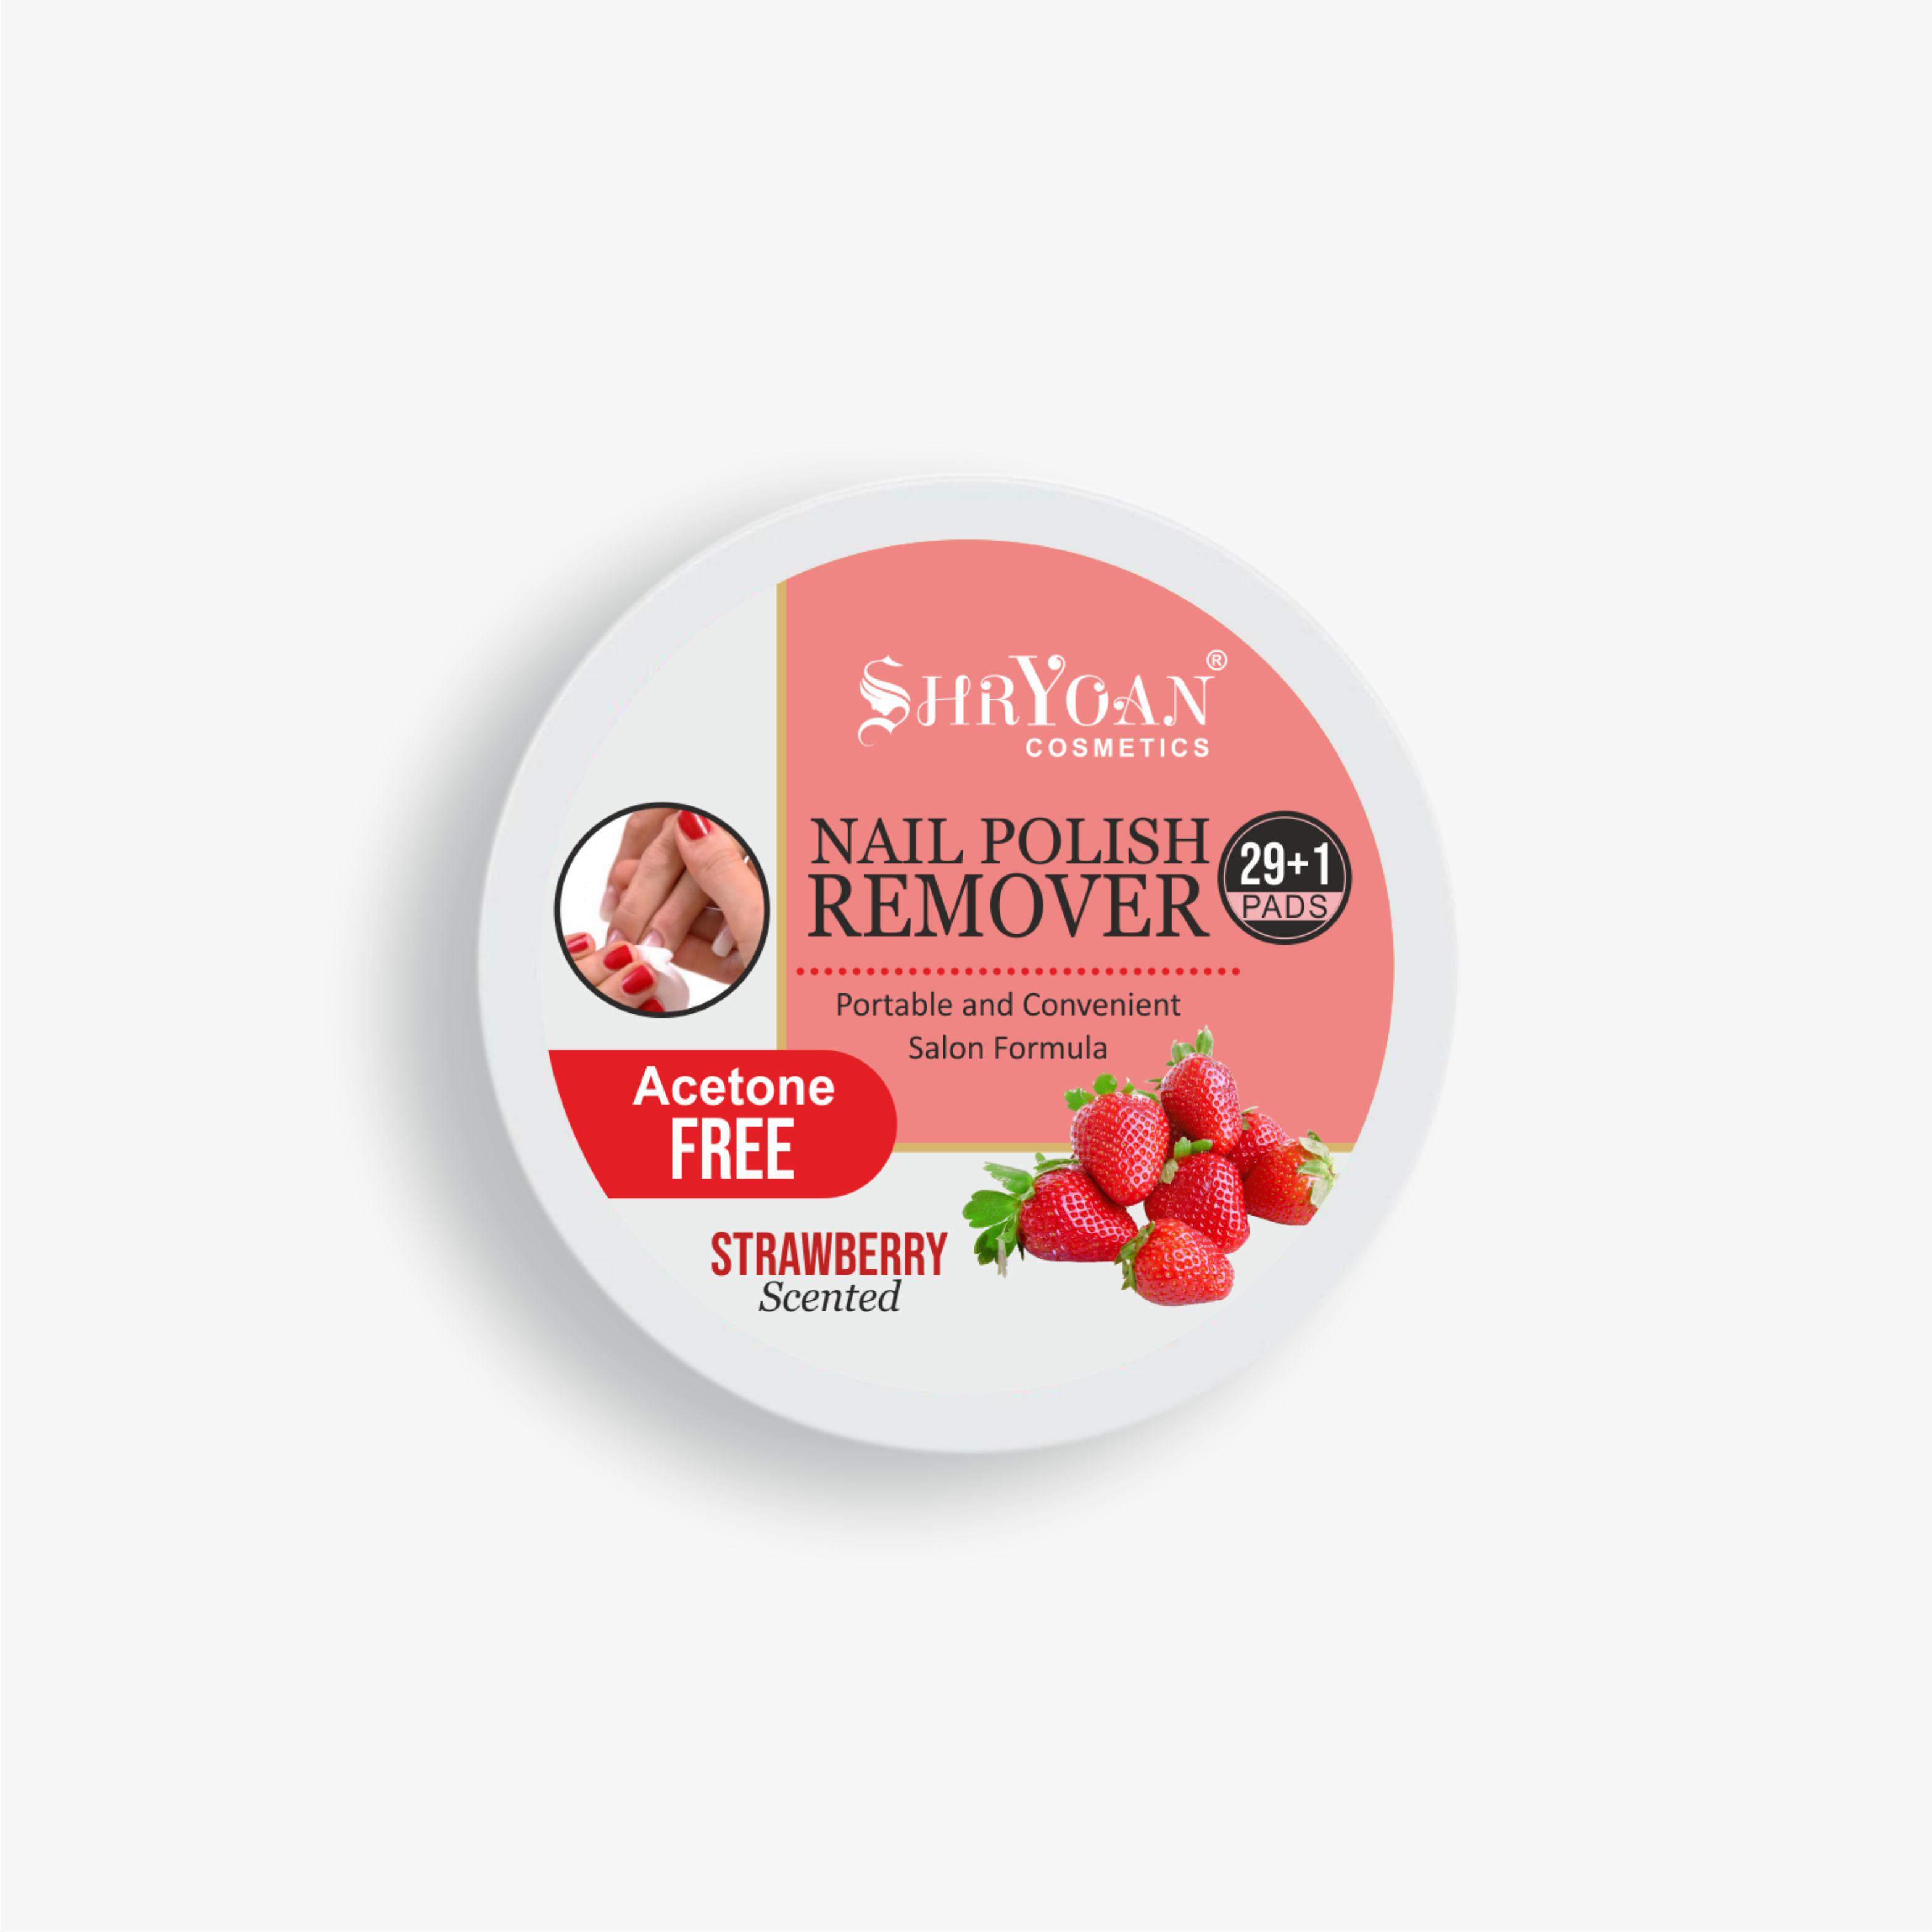 Shryoan Nail Paint Remover Strawberry